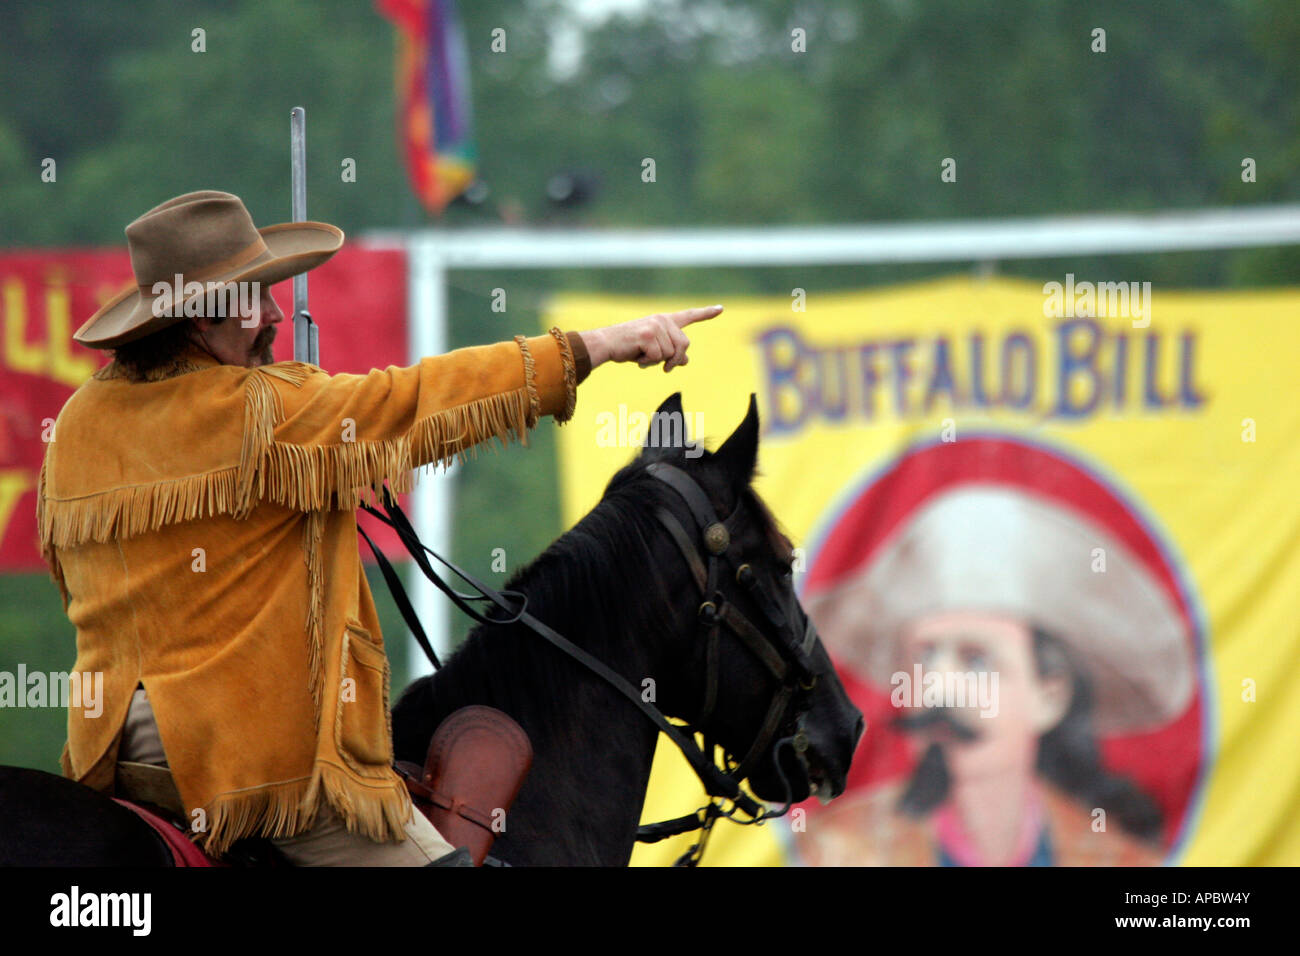 Buffalo Bill pointing at a target that he will be shooting at during a Wild West Reenactment Show Stock Photo